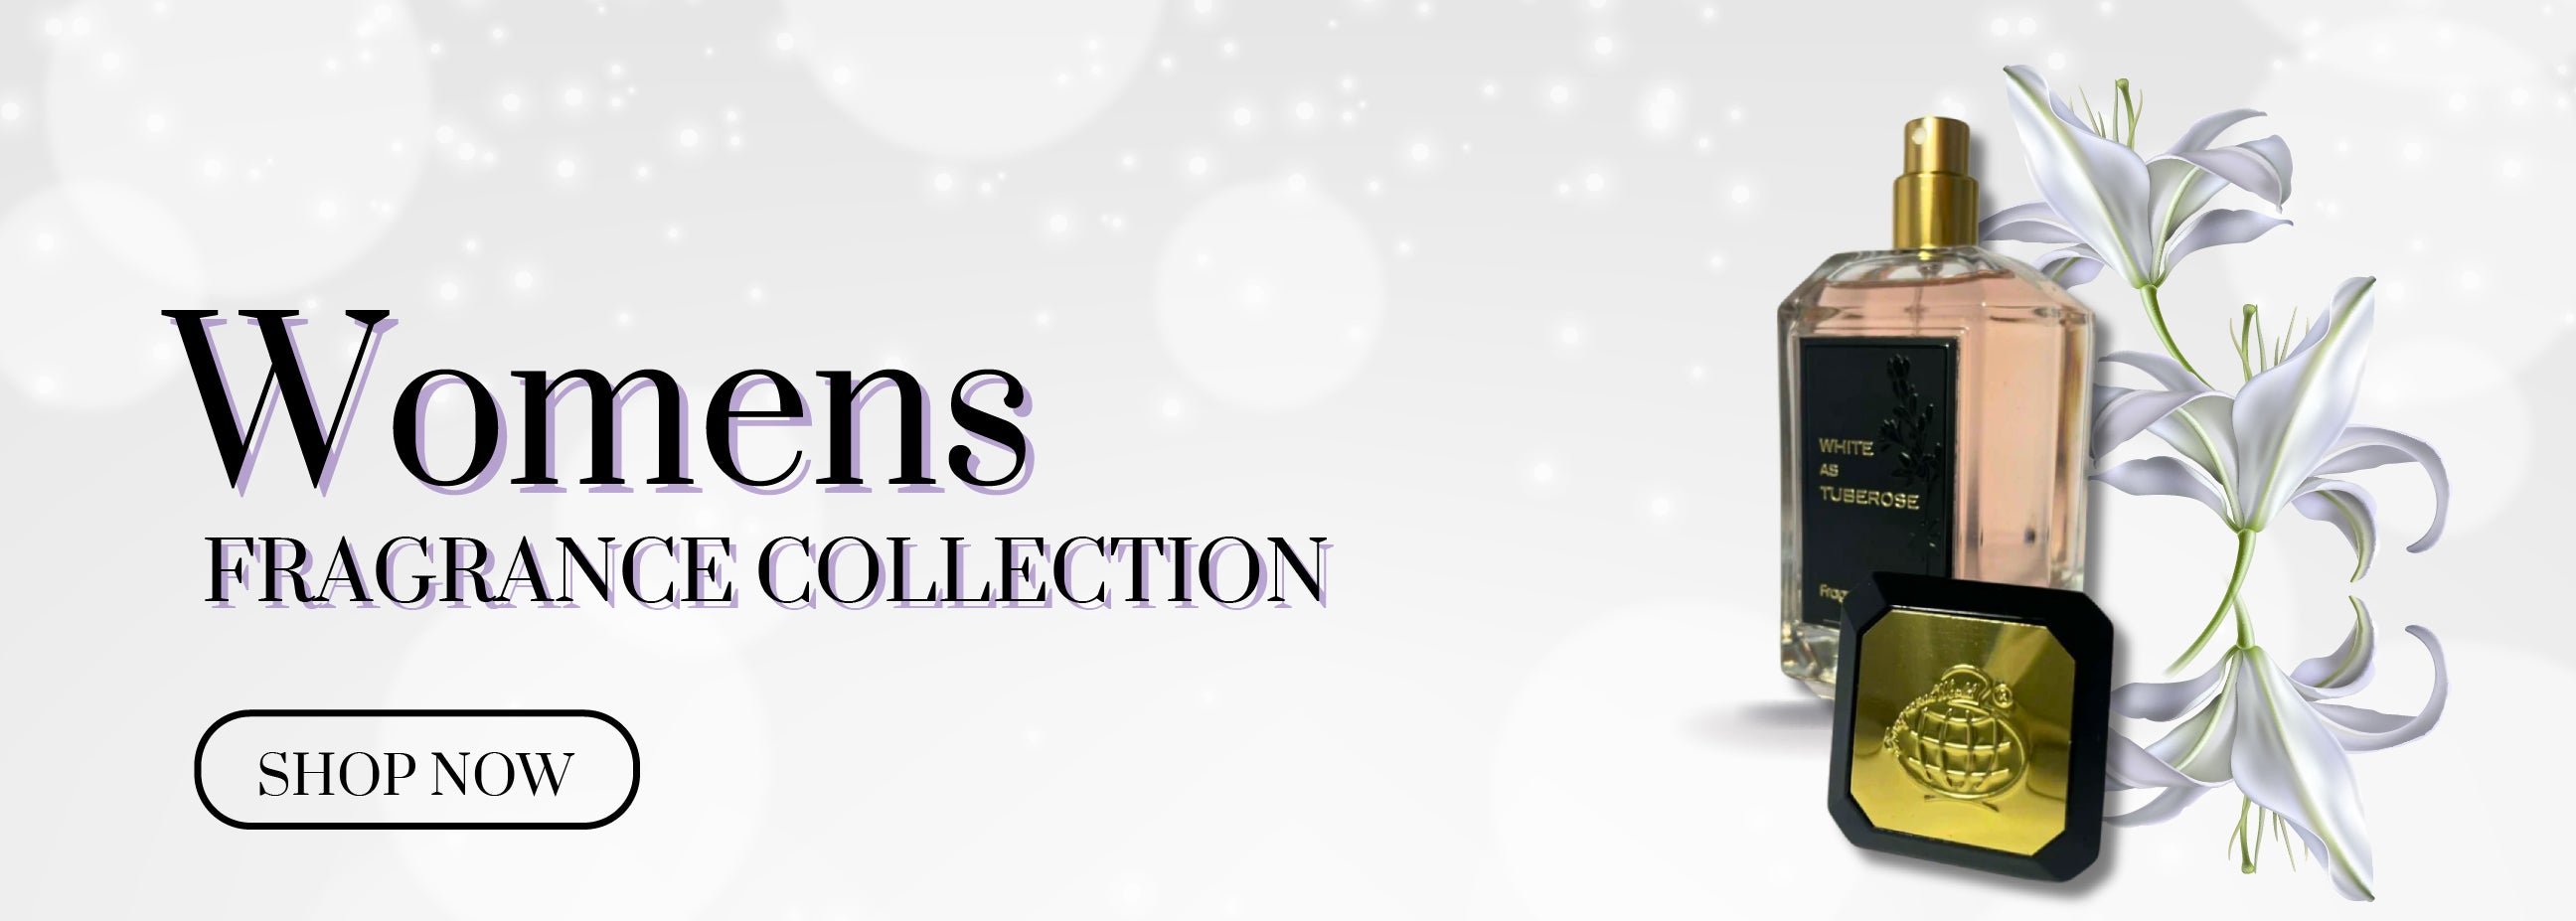 Womens Fragrance Collection Image Banner